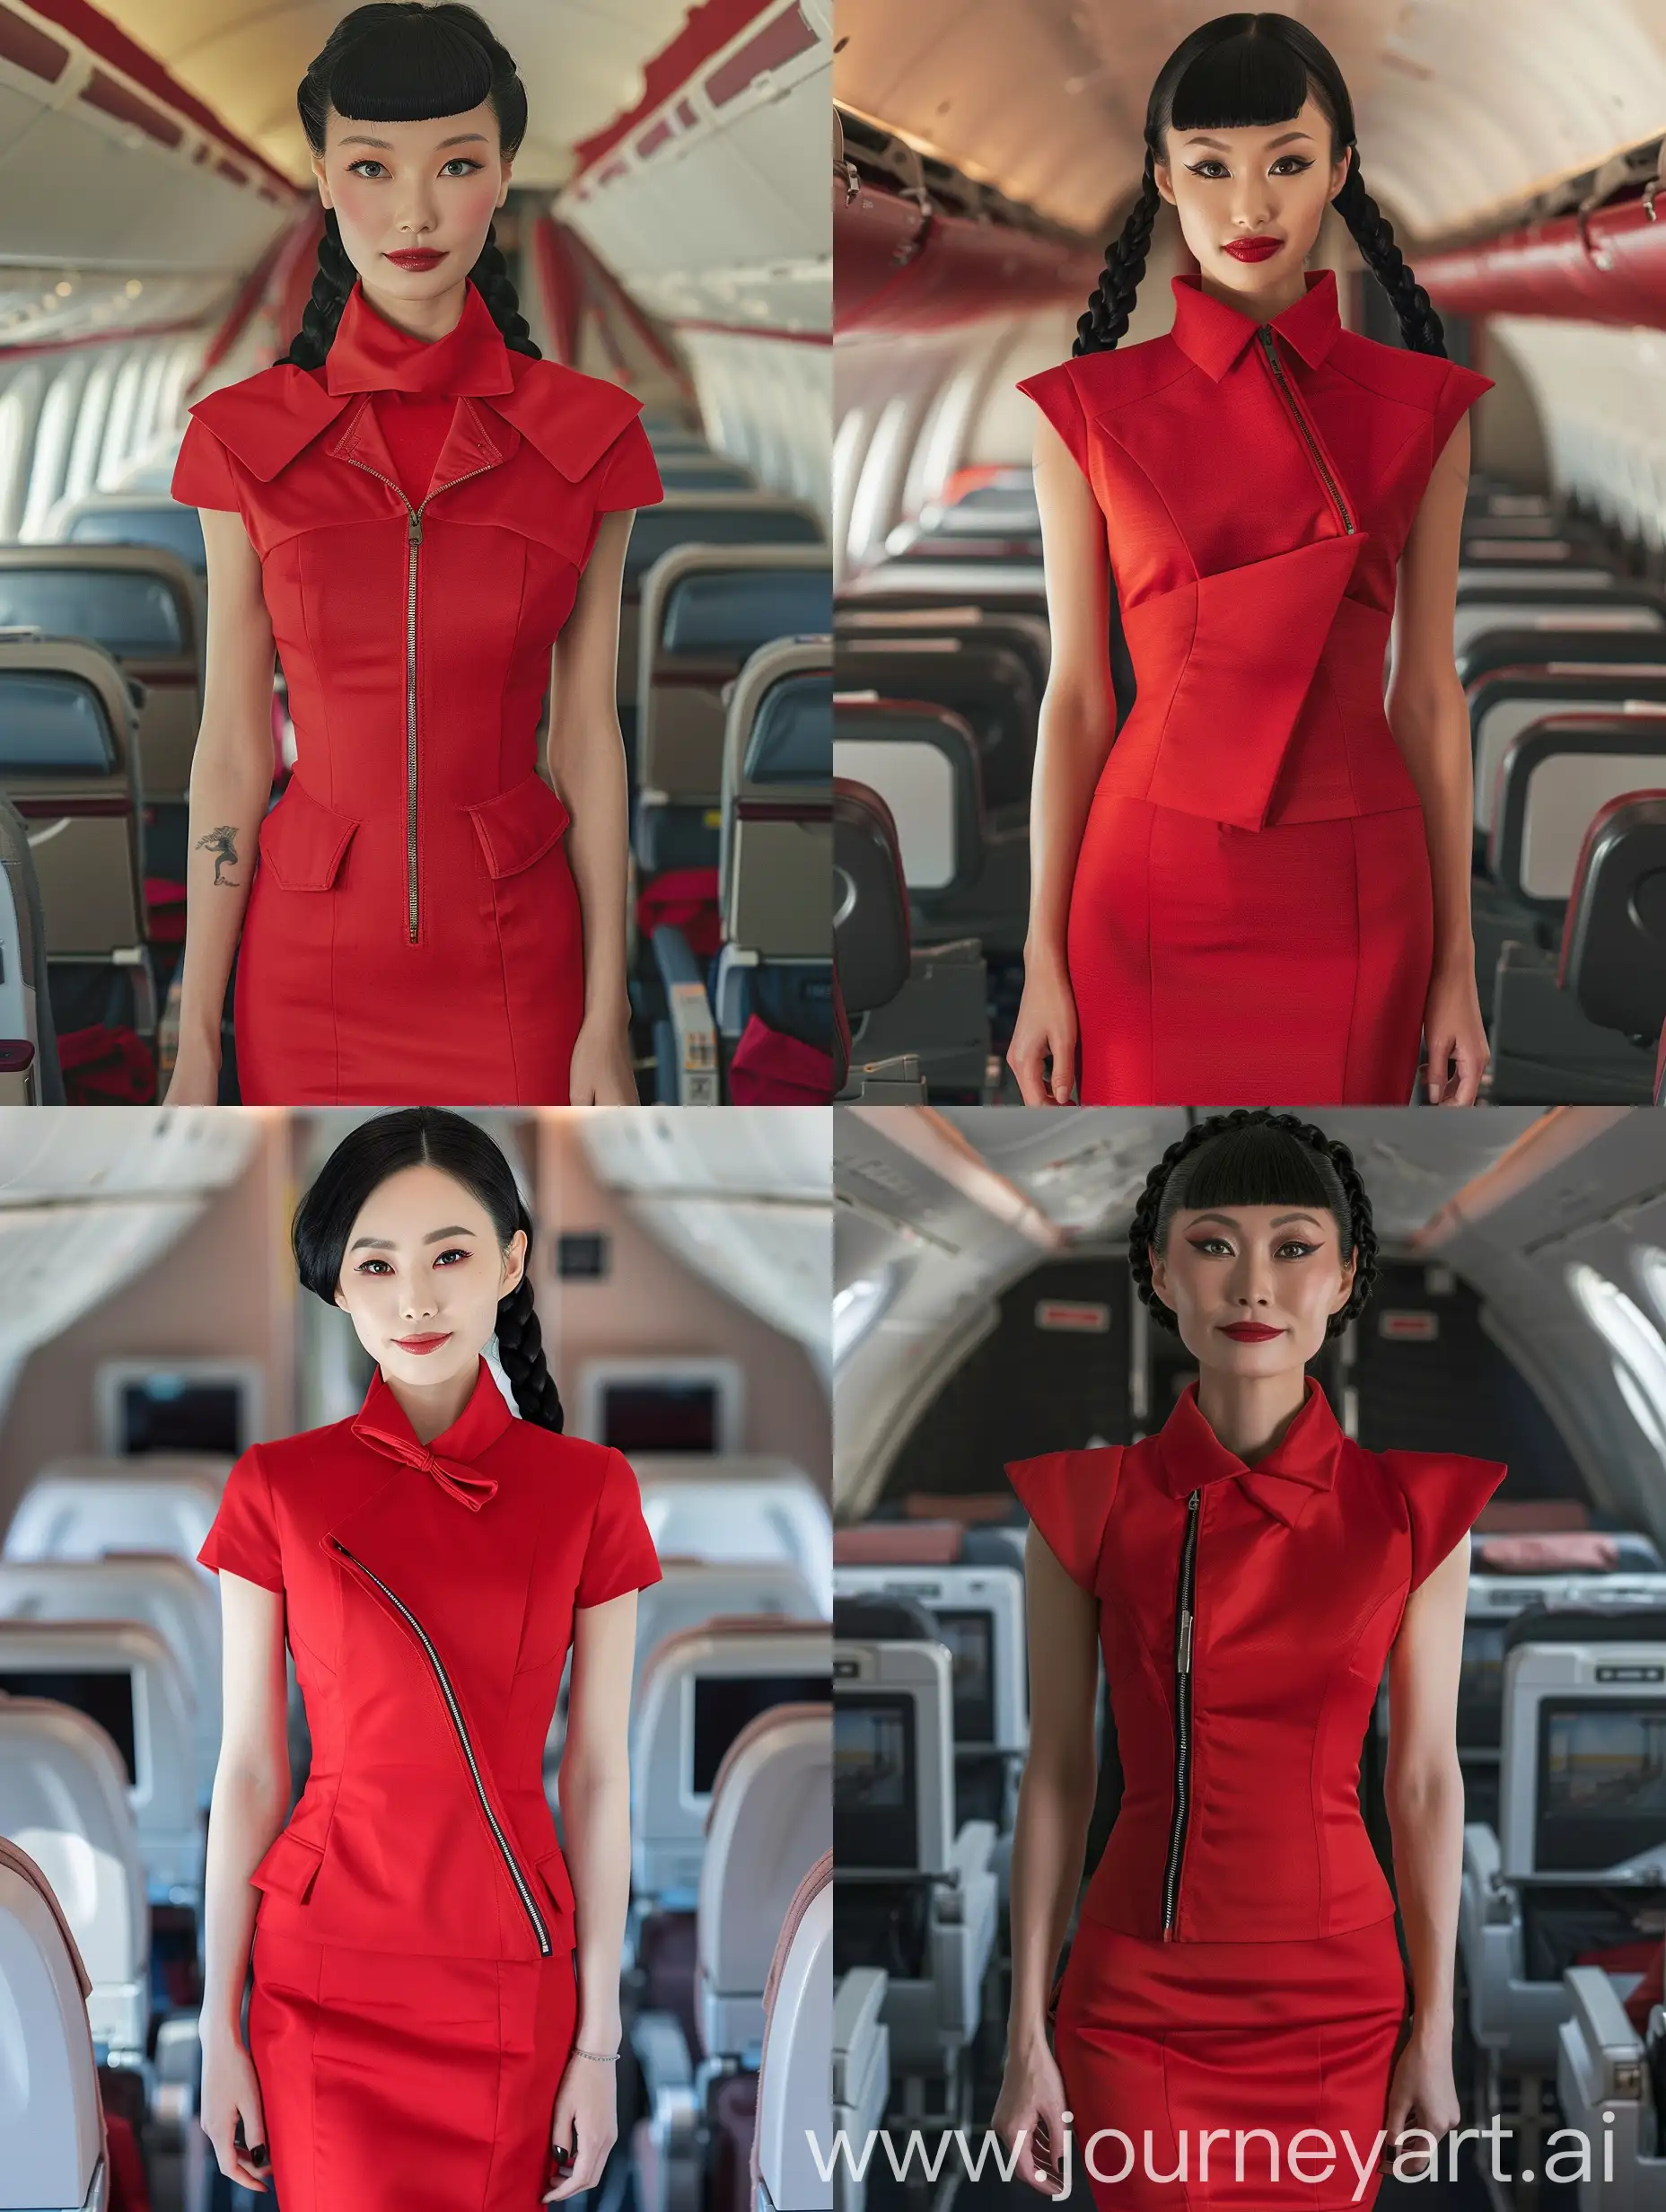 Woman, 40 Years Old, Japanese, Femininity, Model Look, Slim Body, Black Braided Hair, Makeup, Professional Look, Modern Stewardess Red Uniform, Formal Red Dress, Zip Up, Fastened, Large Folded Collar, Short Sleeves, Standing in Airplane Cabin, Smiling, Proud Pose, Close Up View, Photography, Realism